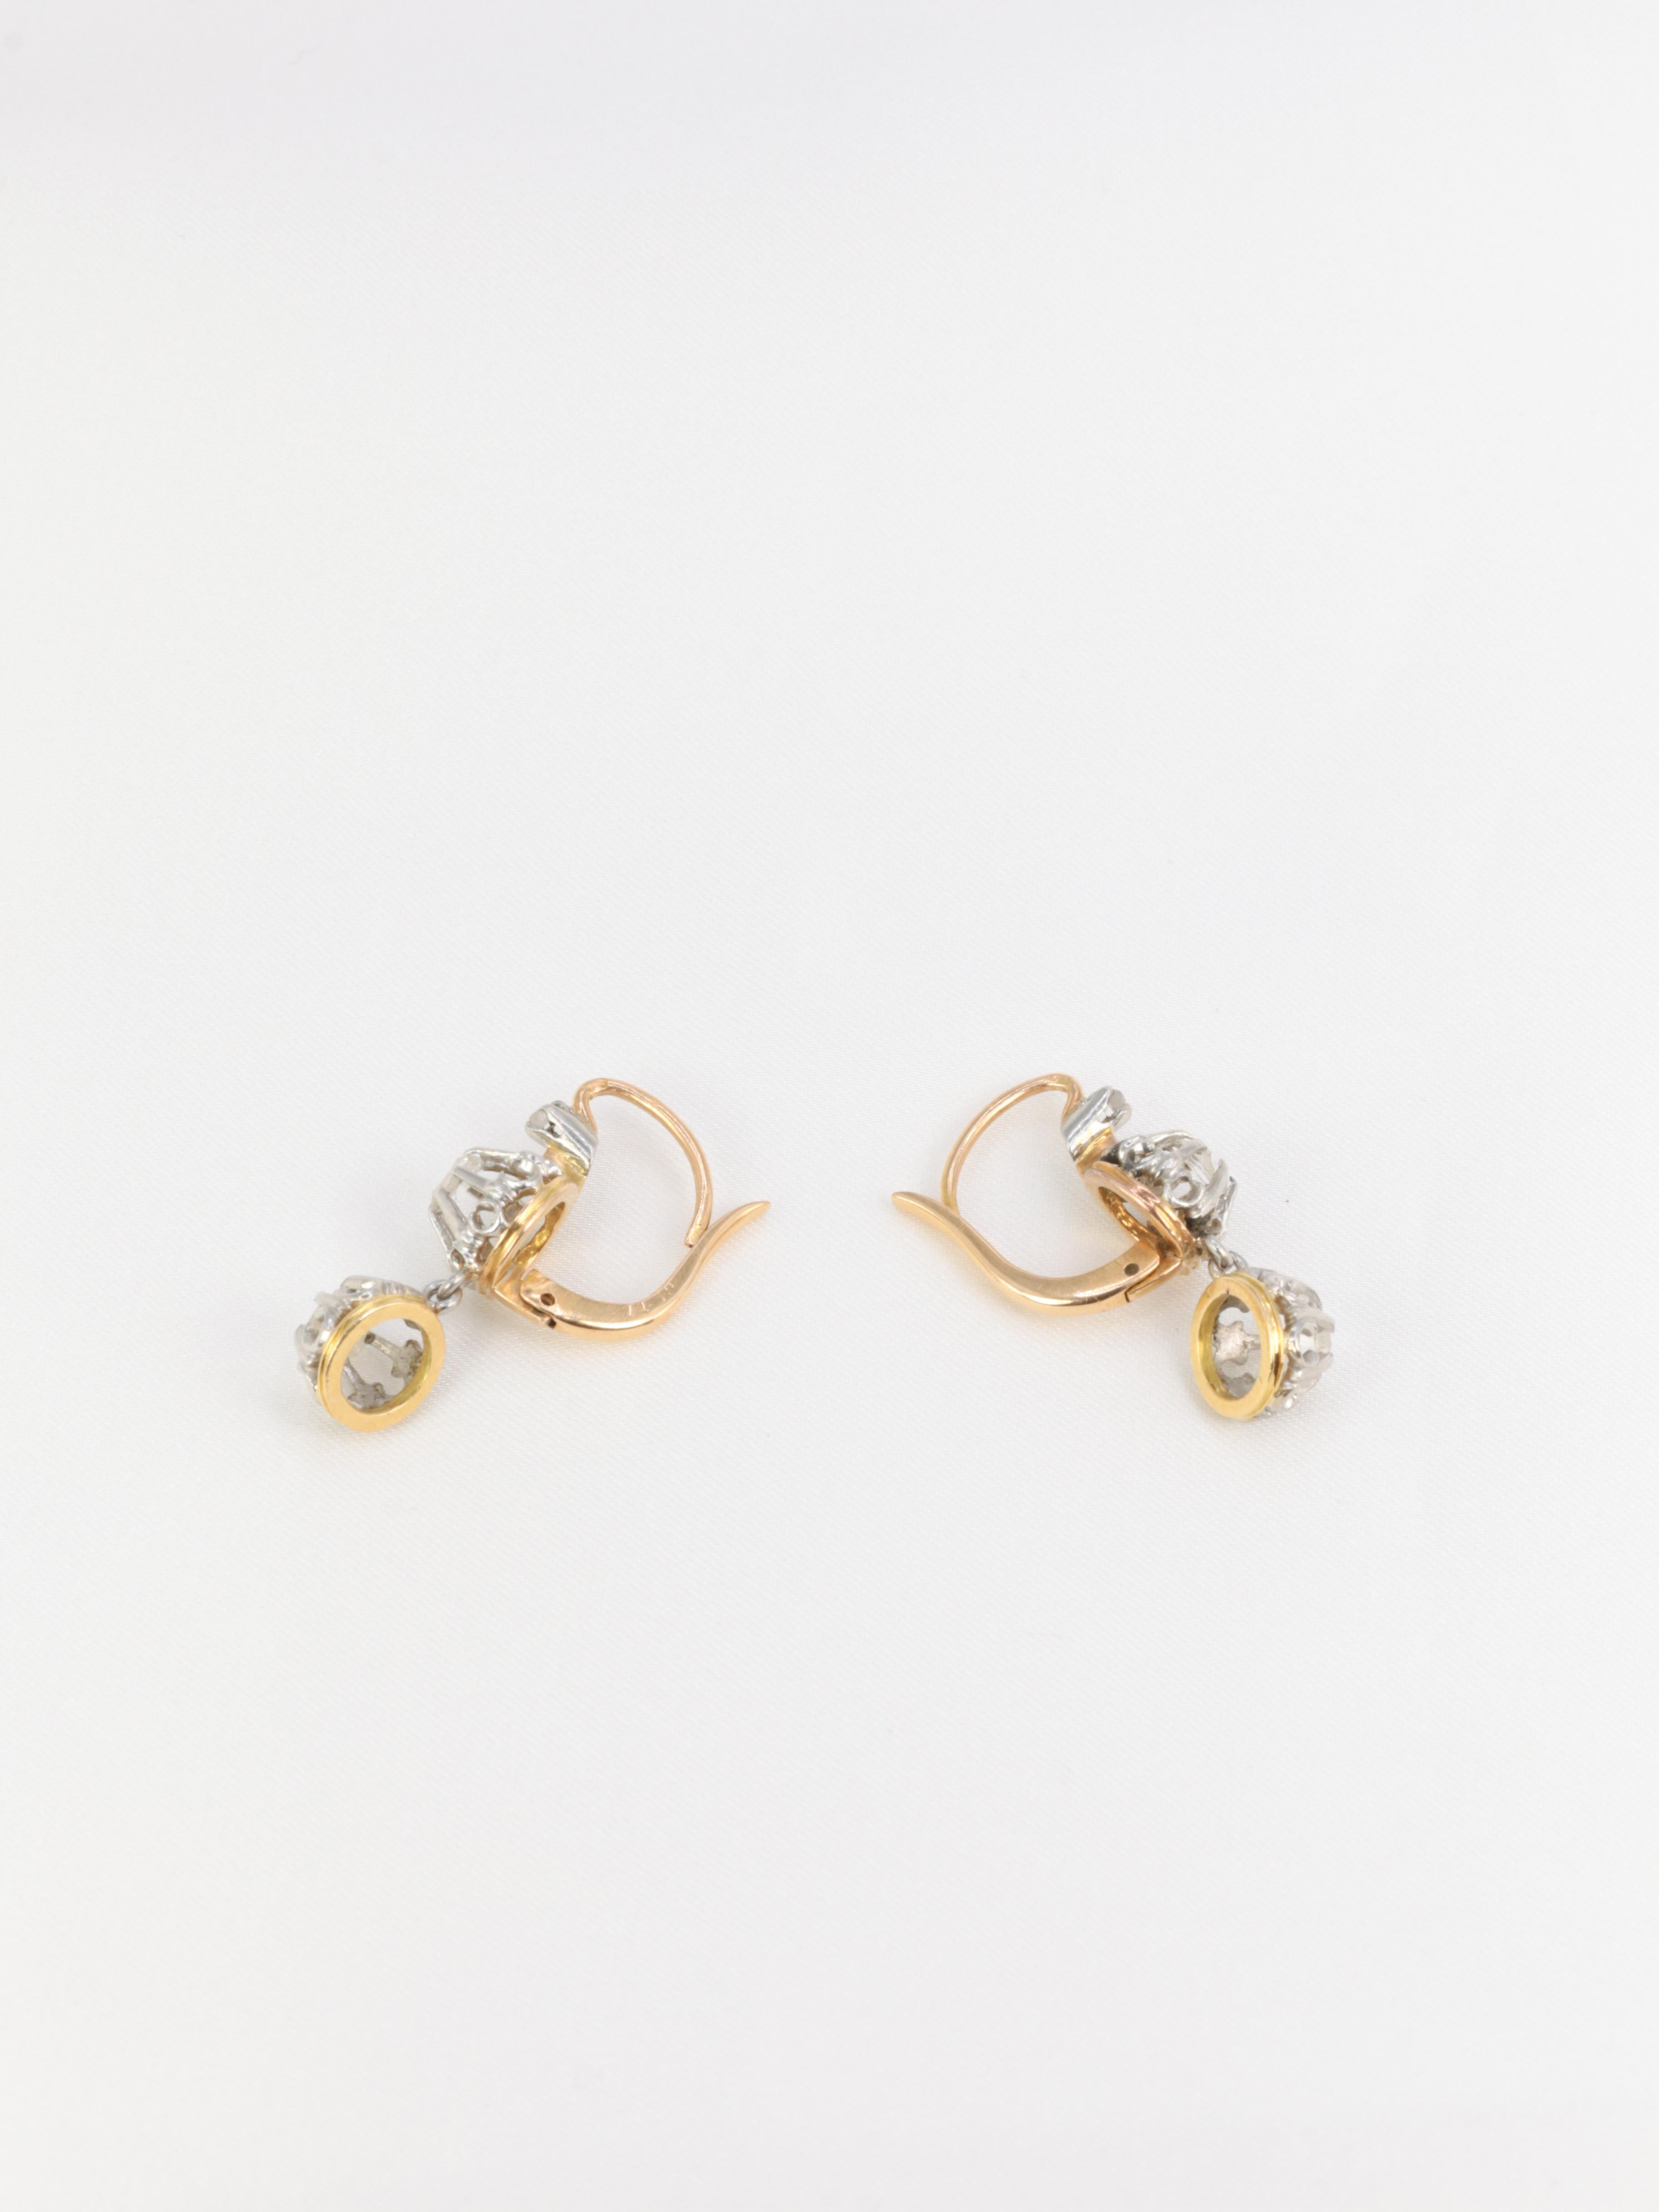 18Kt (750°/°°) yellow gold and silver dormeuse earrings featuring a small rose-cut diamond set in a larger, beautifully worked and openworked bezel. These earrings hold another bezel in pendeloque set with a rose-cut diamond of comparable